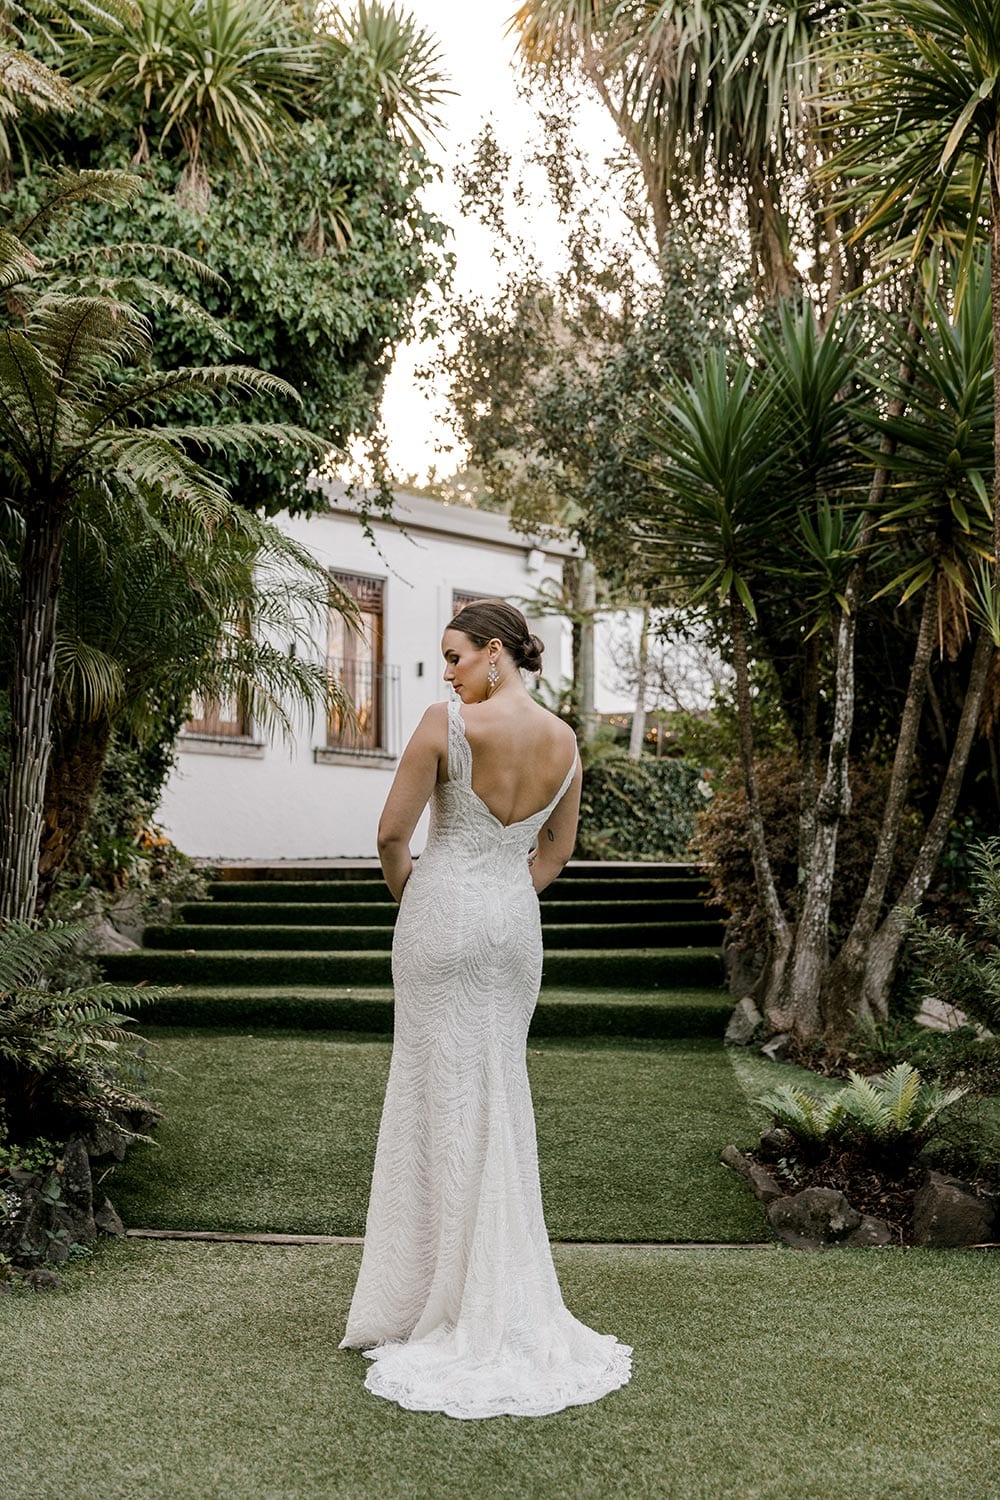 Juliette Wedding Dress from Vinka Design. Flattering stretch fitted lace wedding dress with beautiful ivory rich beading. Structured bodice provides support while remaining effortless to wear. Full length of dress from behind. Photographed at Tui Hills.